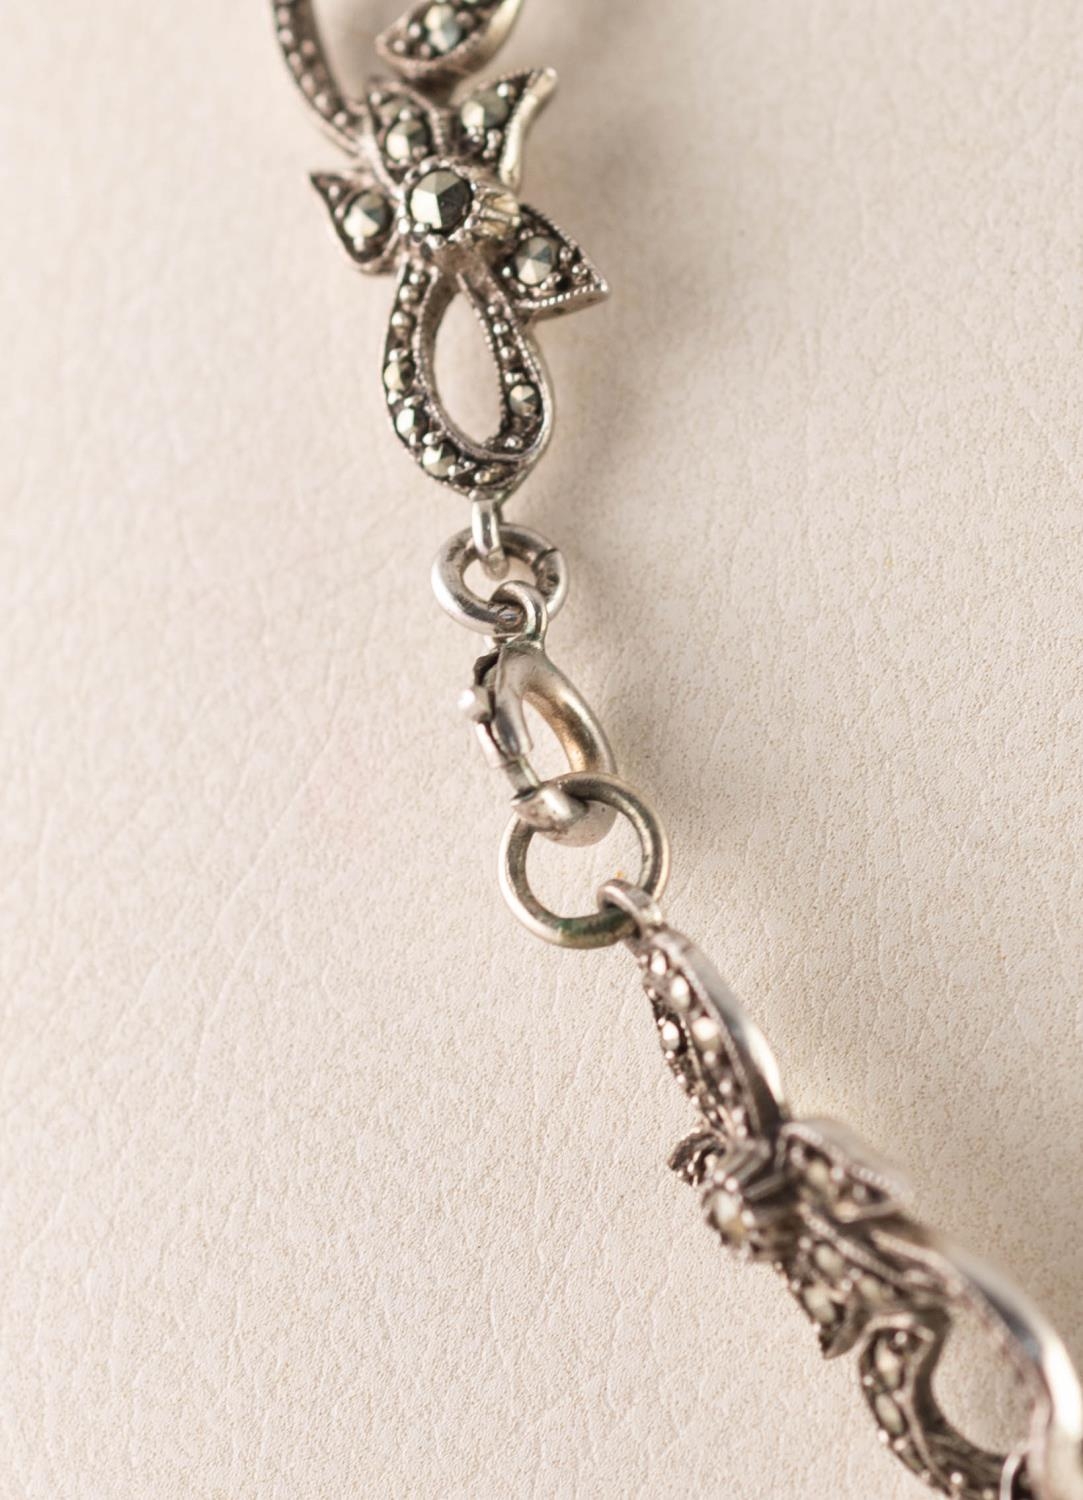 SILVER AND MARCASITE SET SCROLLIATED NECKLACE - Image 3 of 3